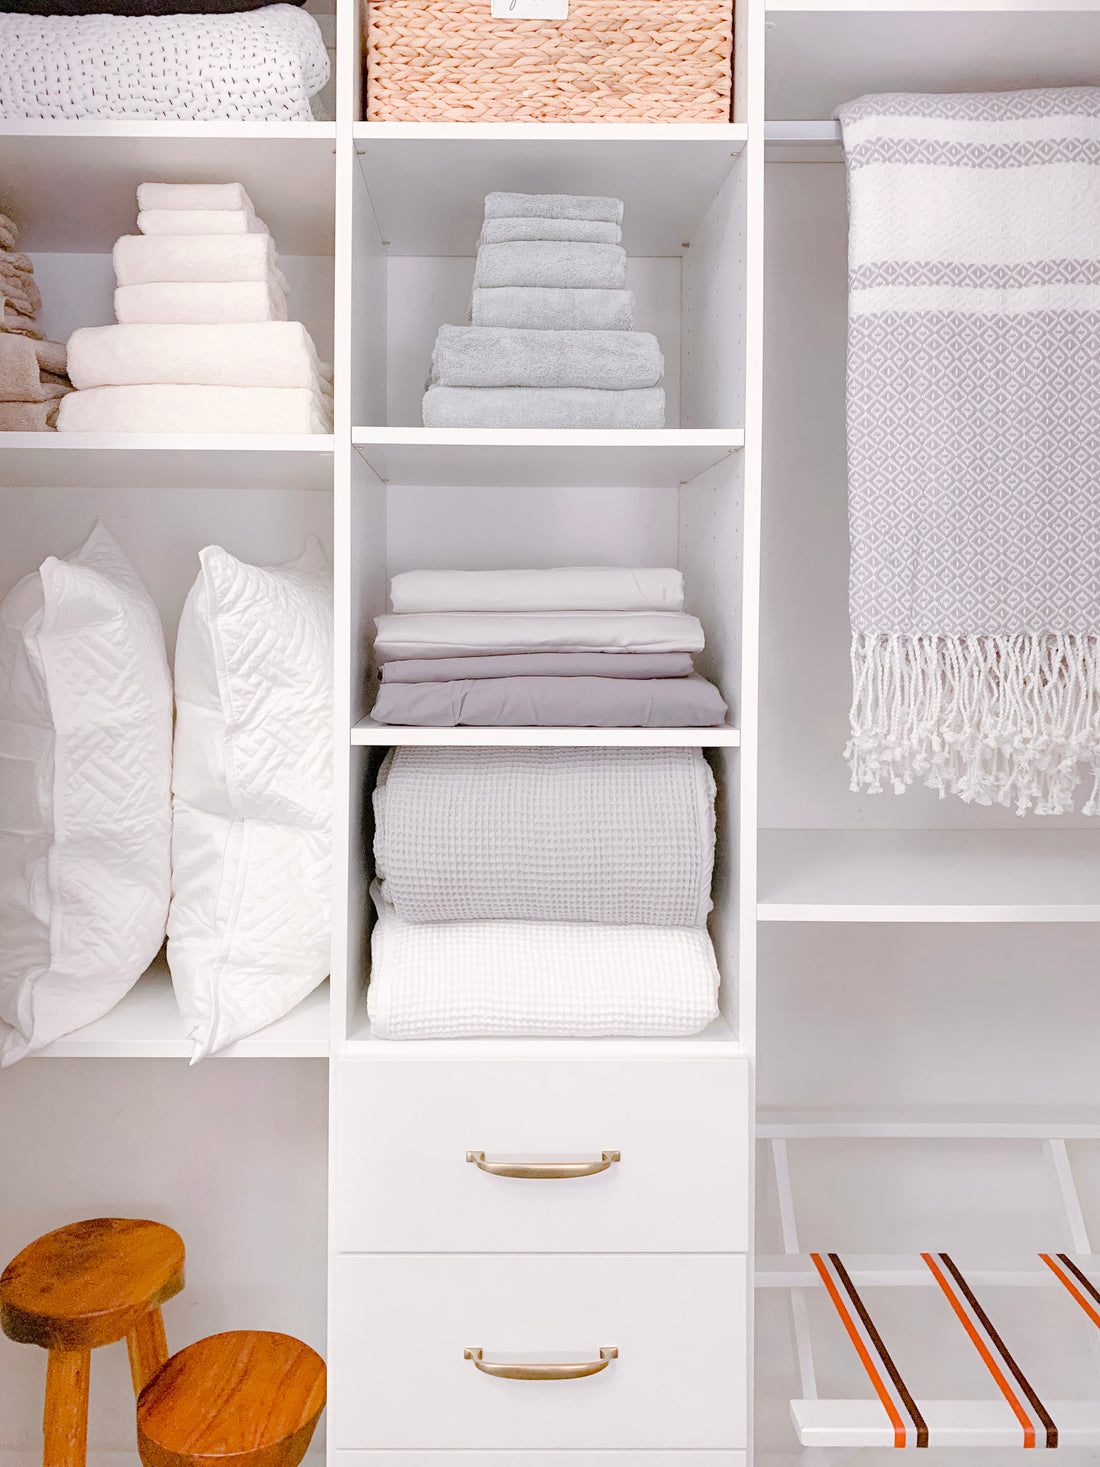 Pull out drawers in the linen closet. Great idea, no more messing up the  place ;)